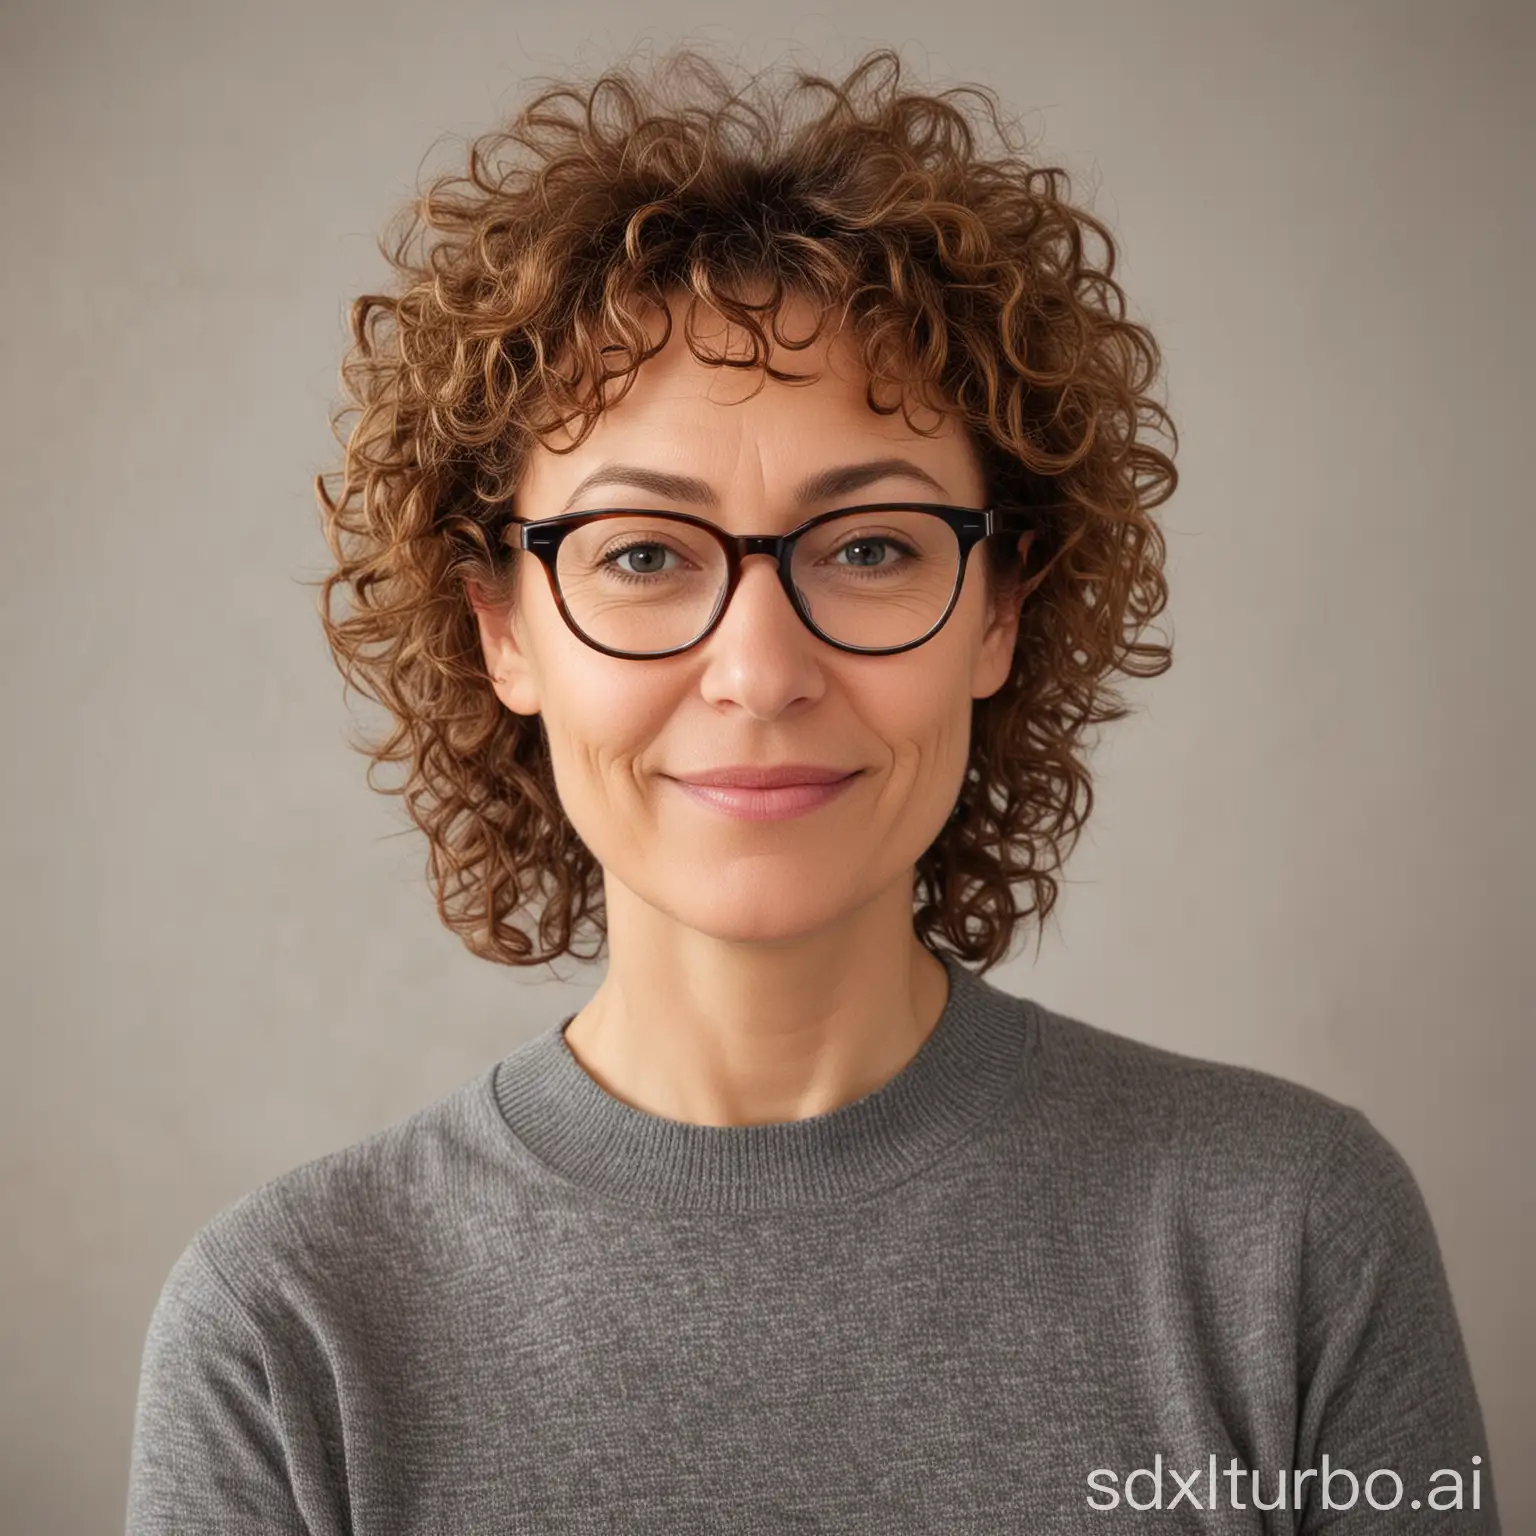 German-Woman-with-Chestnut-Curly-Hair-and-HornRimmed-Glasses